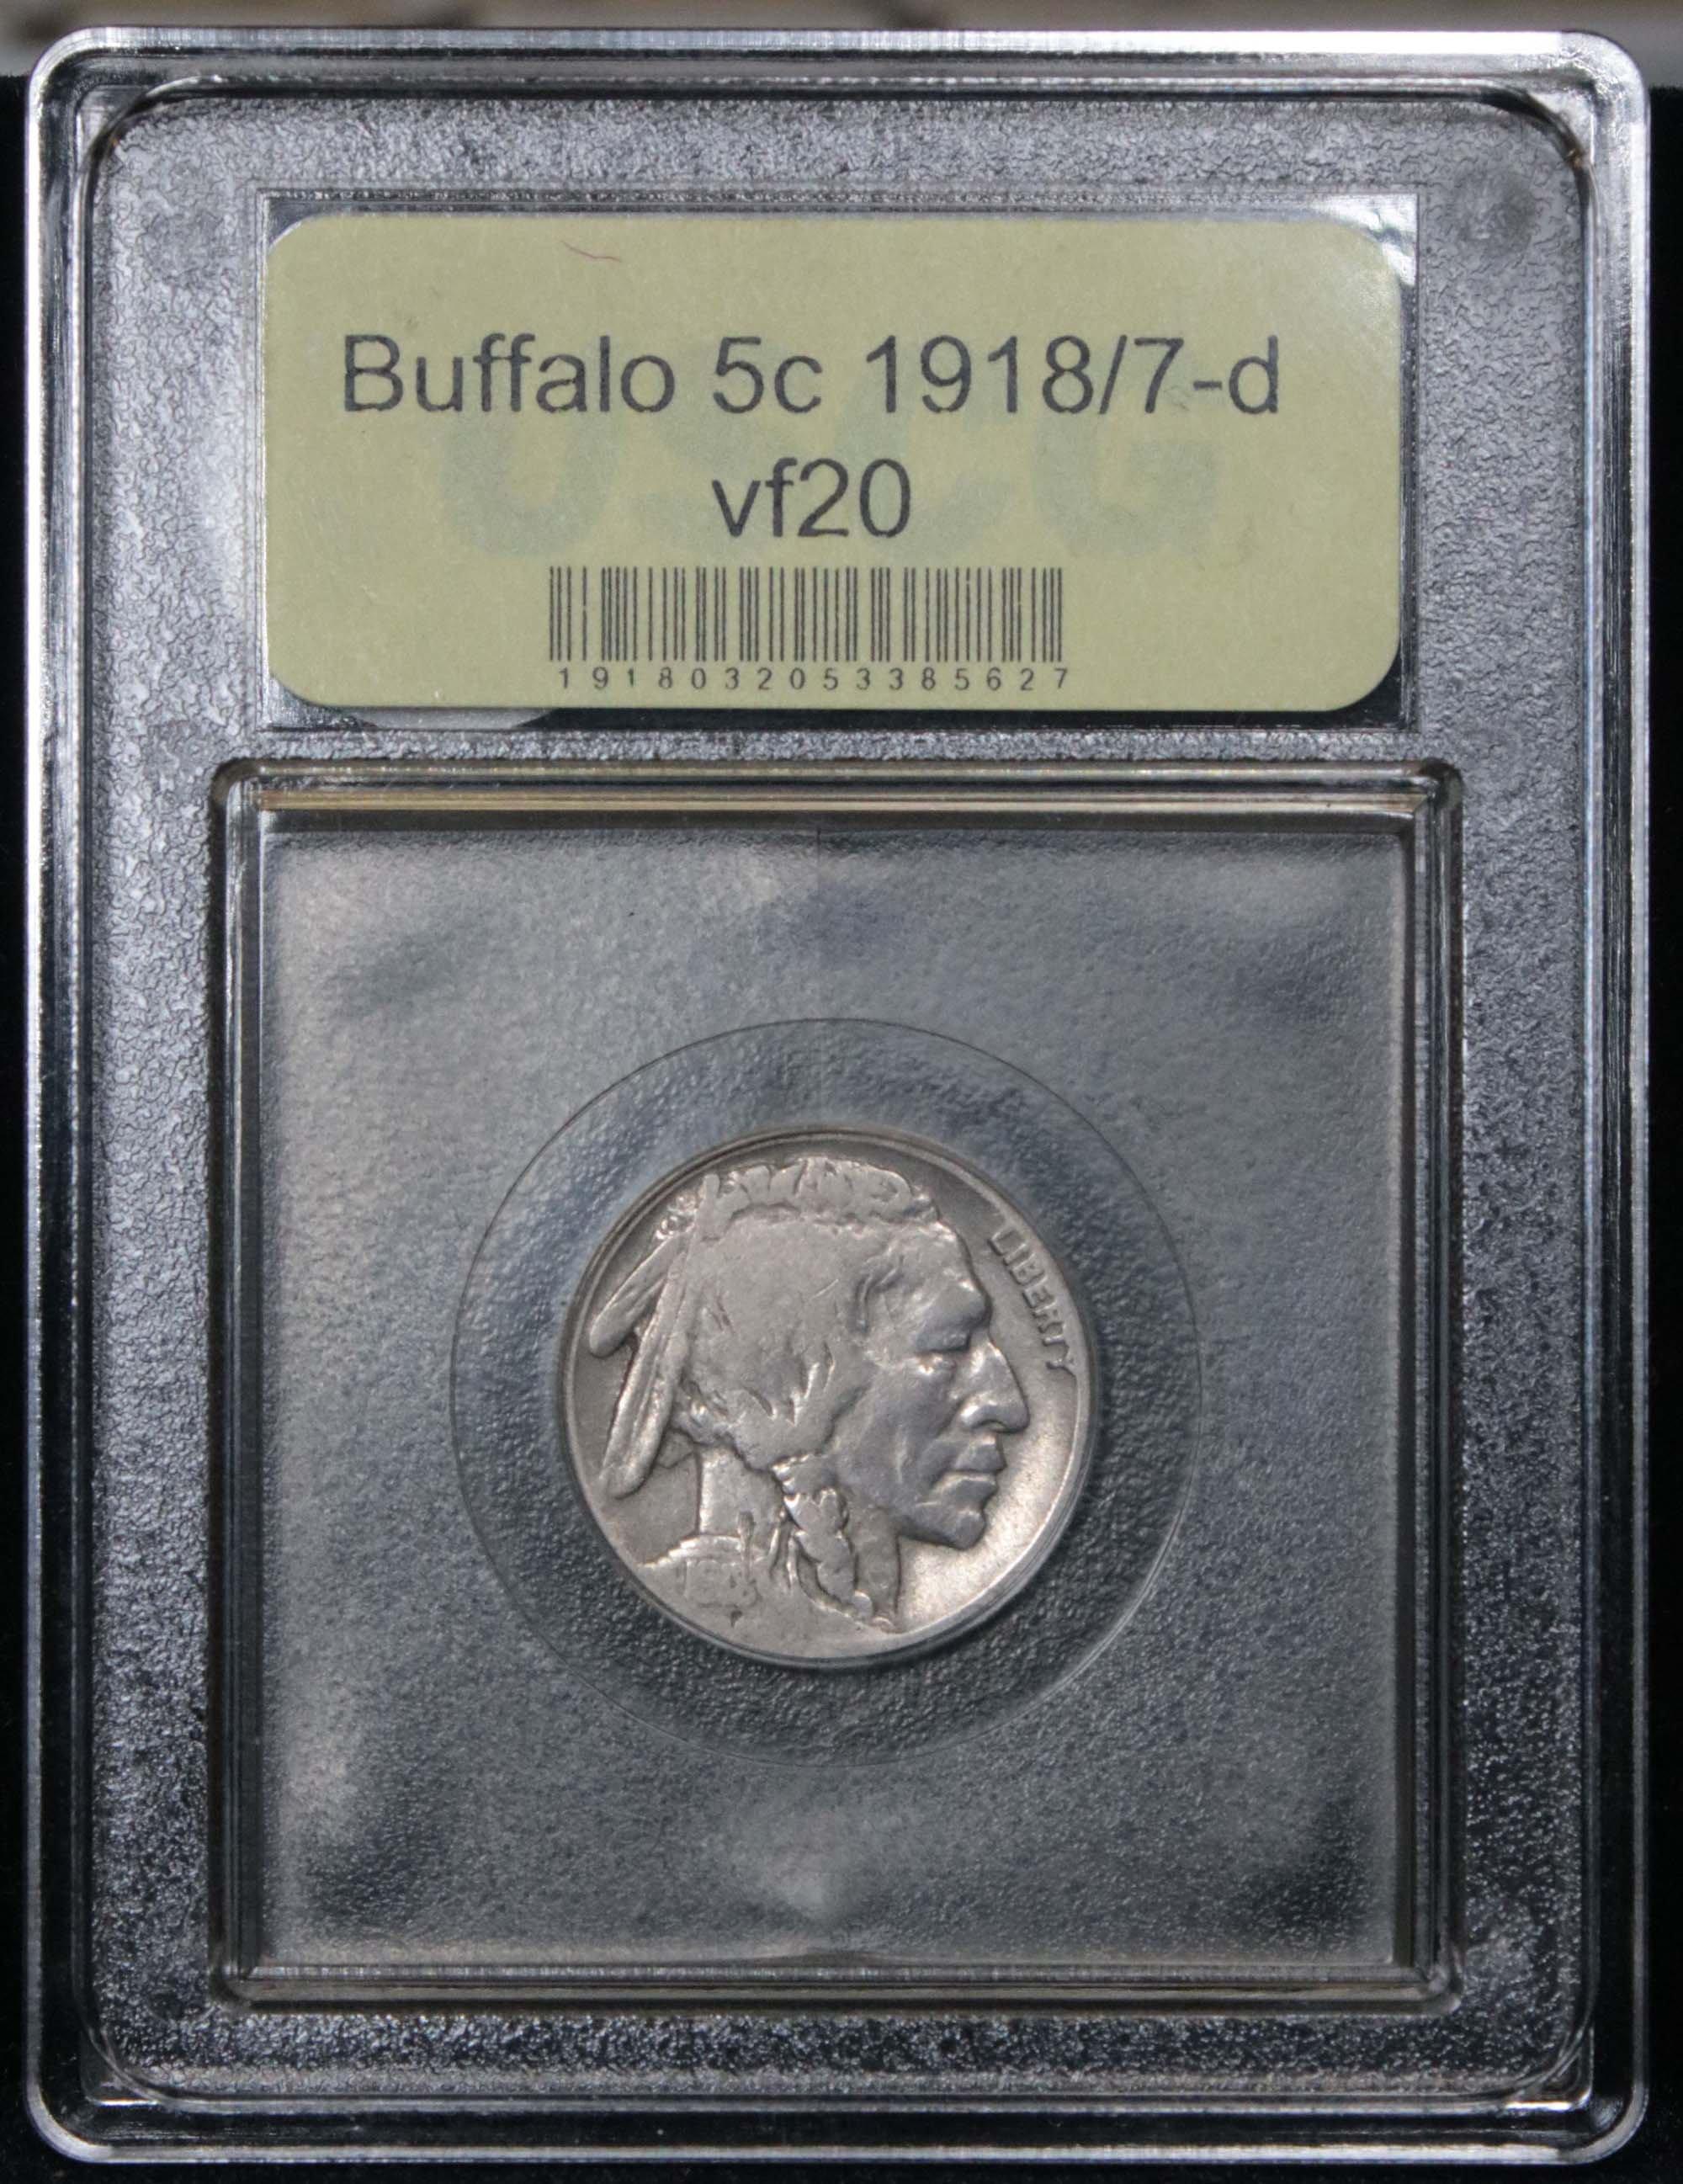 ***Auction Highlight*** Key to series 1918/7-d Buffalo Nickel 5c Graded vf, very fine by USCG (fc)